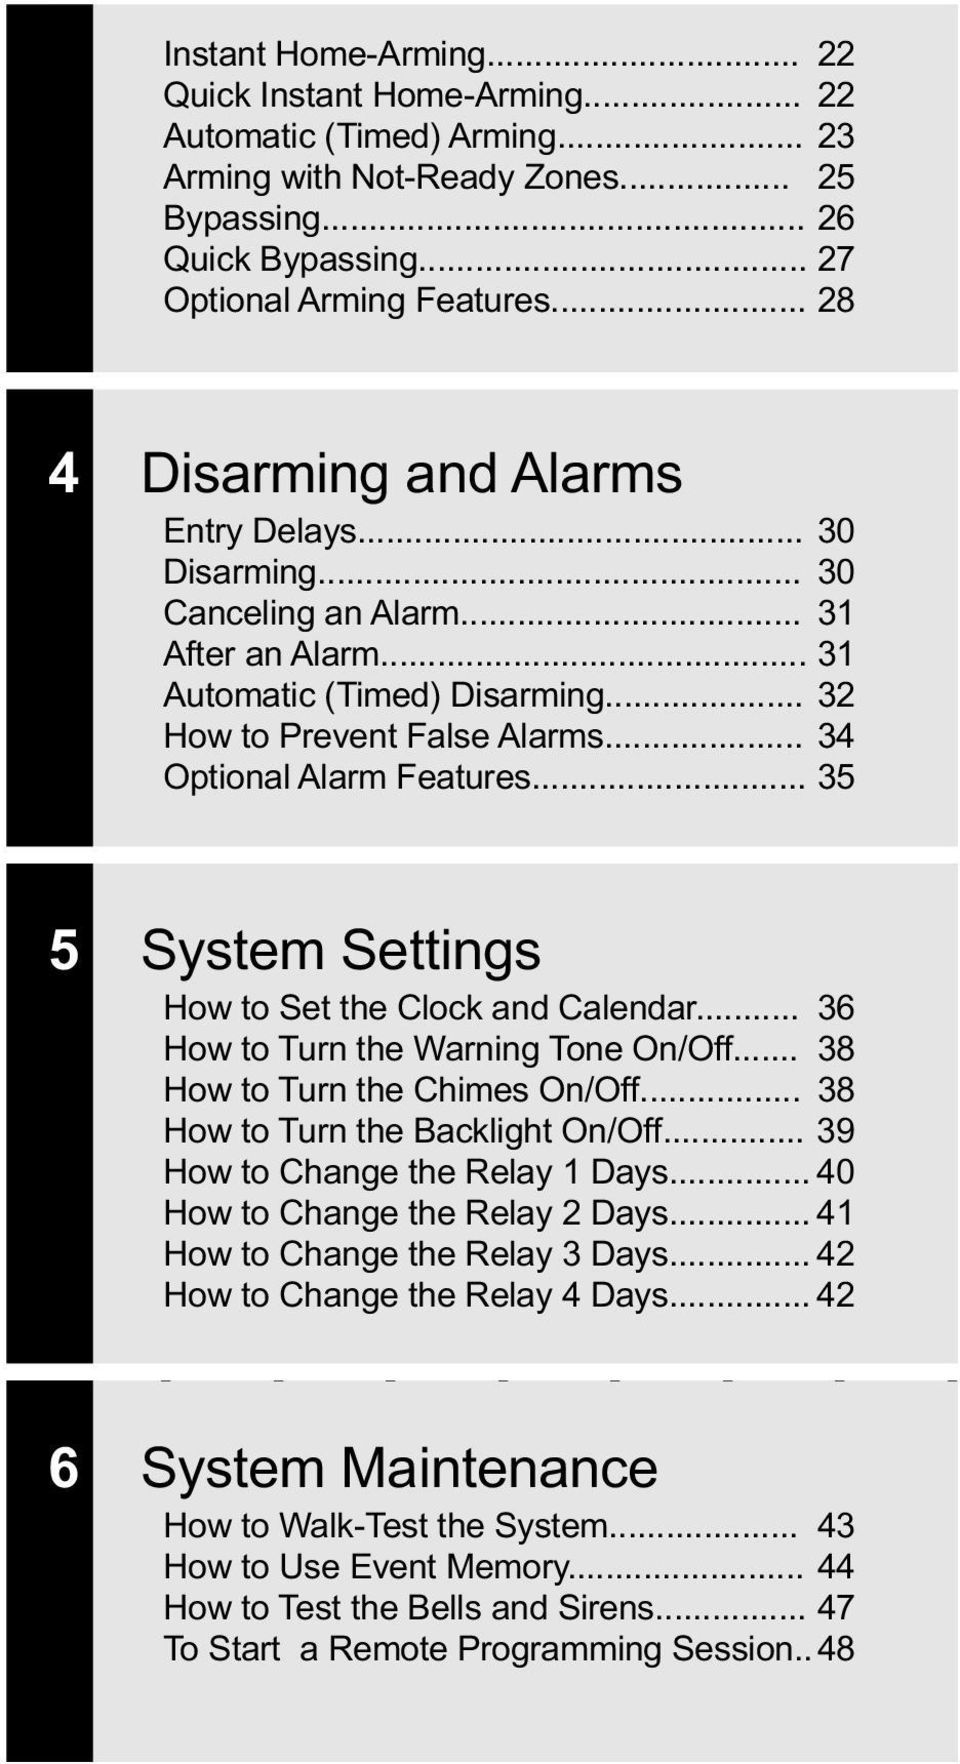 .. 34 Optional Alarm Features... 35 - - - - - - - - - 5 System Settings How to Set the Clock and Calendar... 36 How to Turn the Warning Tone On/Off... 38 How to Turn the Chimes On/Off.